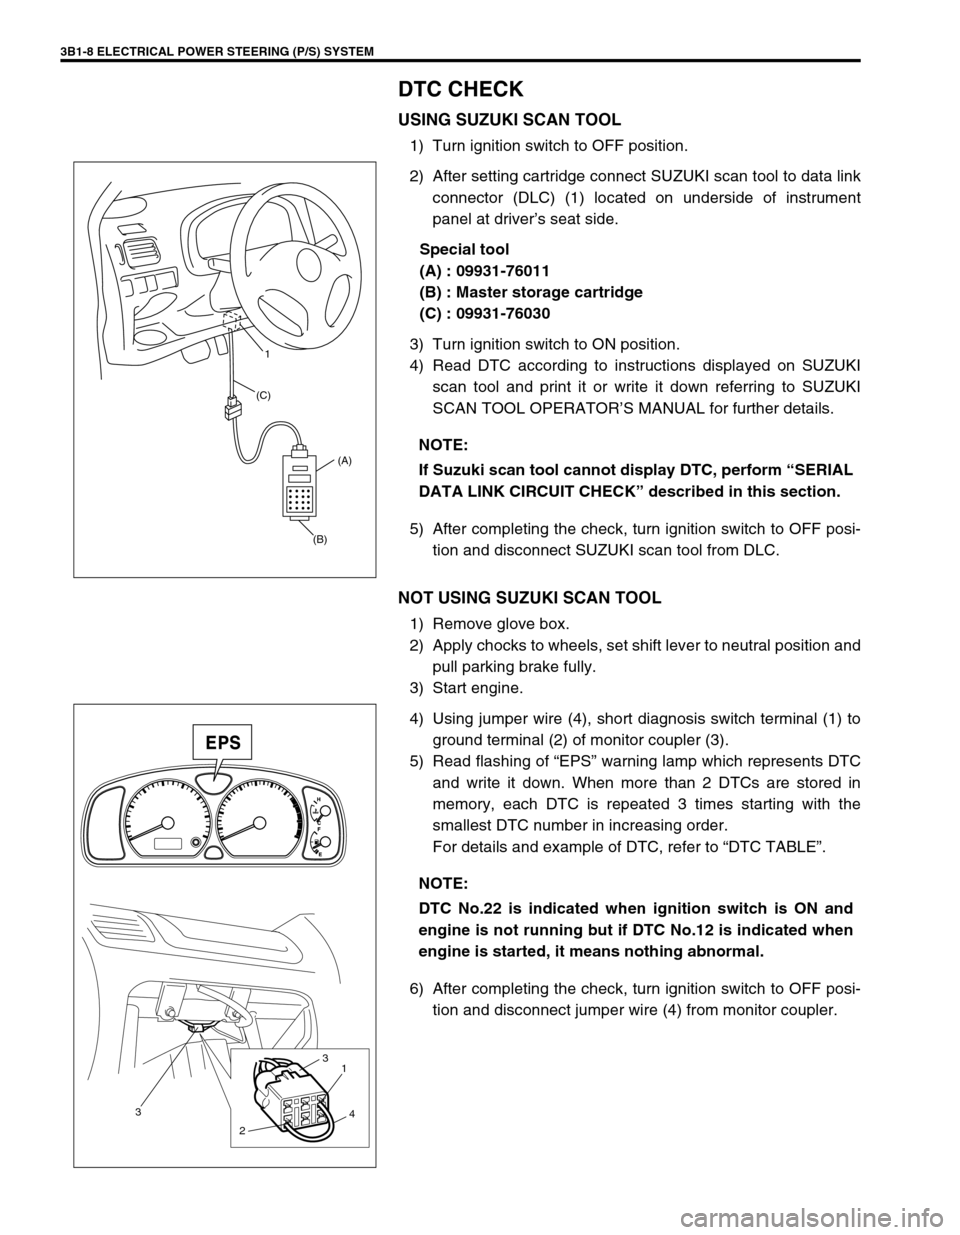 SUZUKI SWIFT 2000 1.G RG413 Service User Guide 3B1-8 ELECTRICAL POWER STEERING (P/S) SYSTEM
DTC CHECK
USING SUZUKI SCAN TOOL
1) Turn ignition switch to OFF position.
2) After setting cartridge connect SUZUKI scan tool to data link
connector (DLC) 